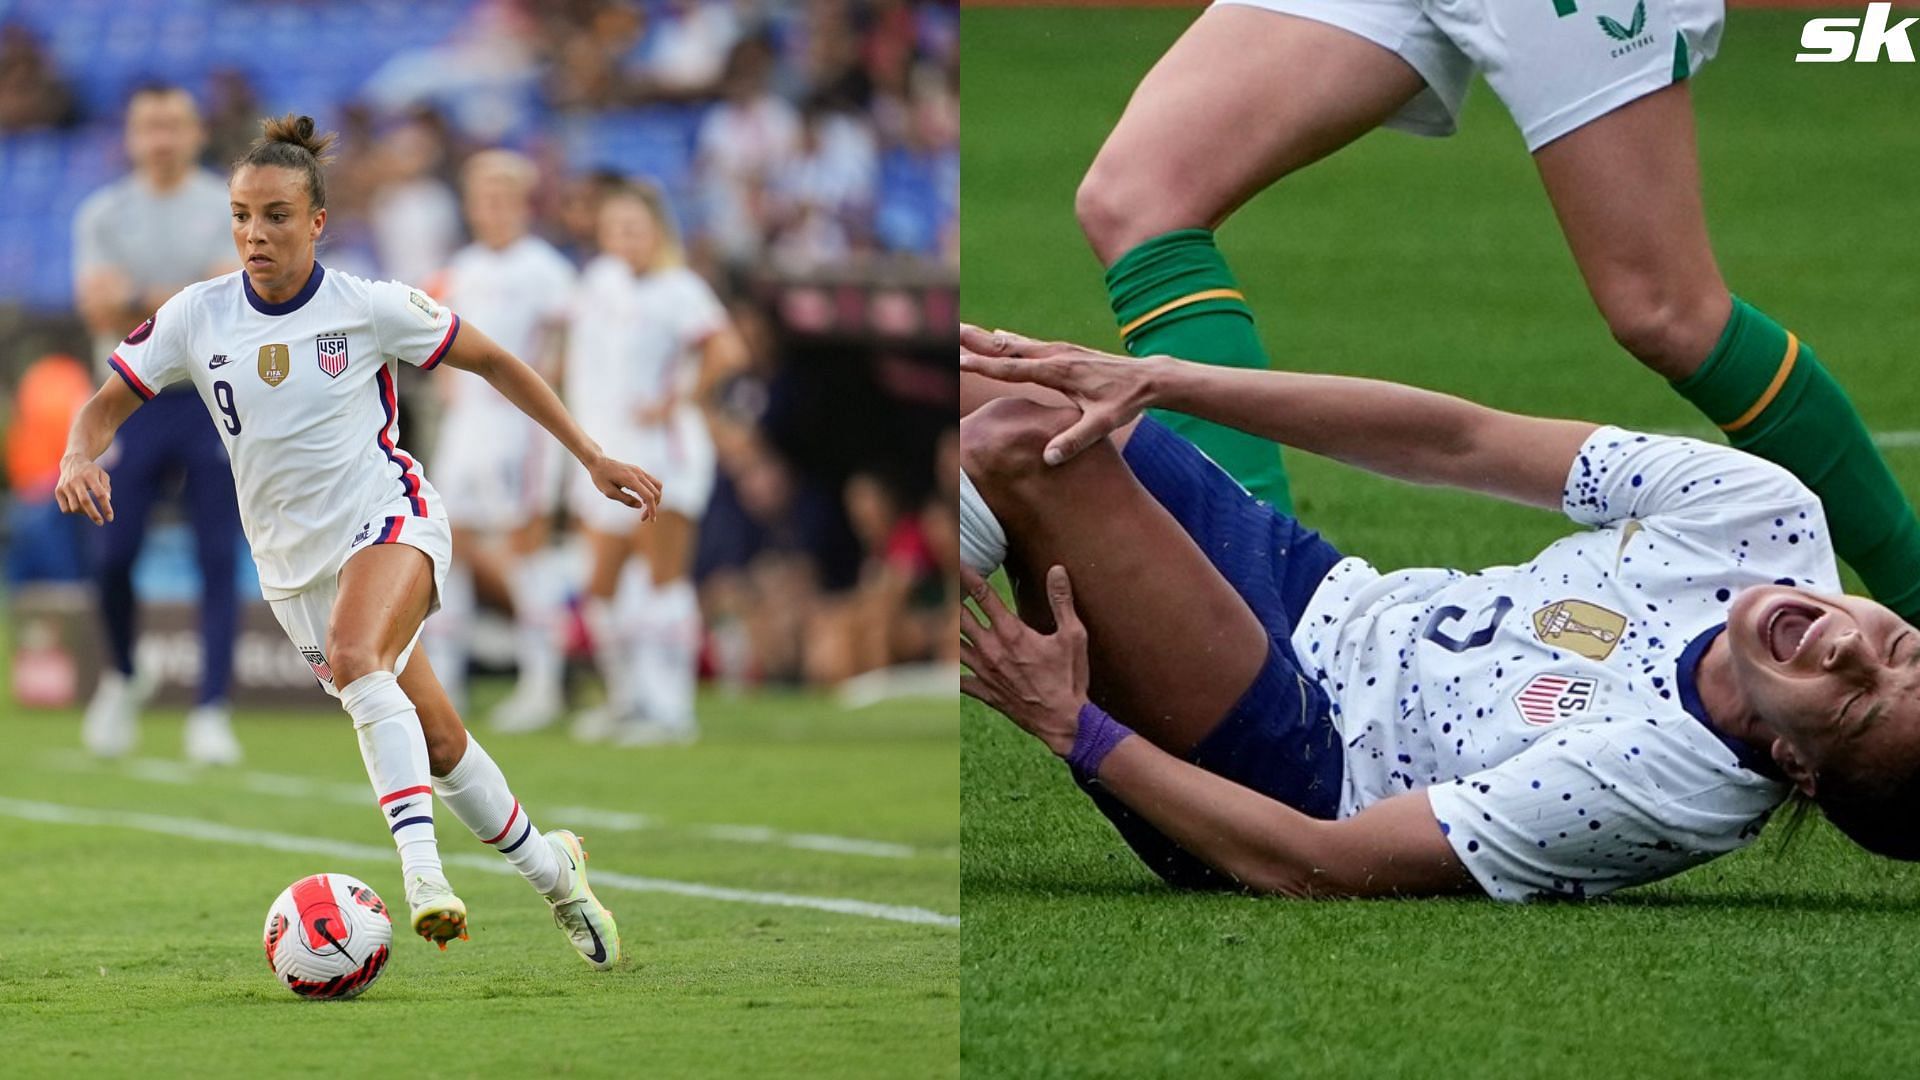 USWNT star Mallory Pugh, Braves' Dansby Swanson announce